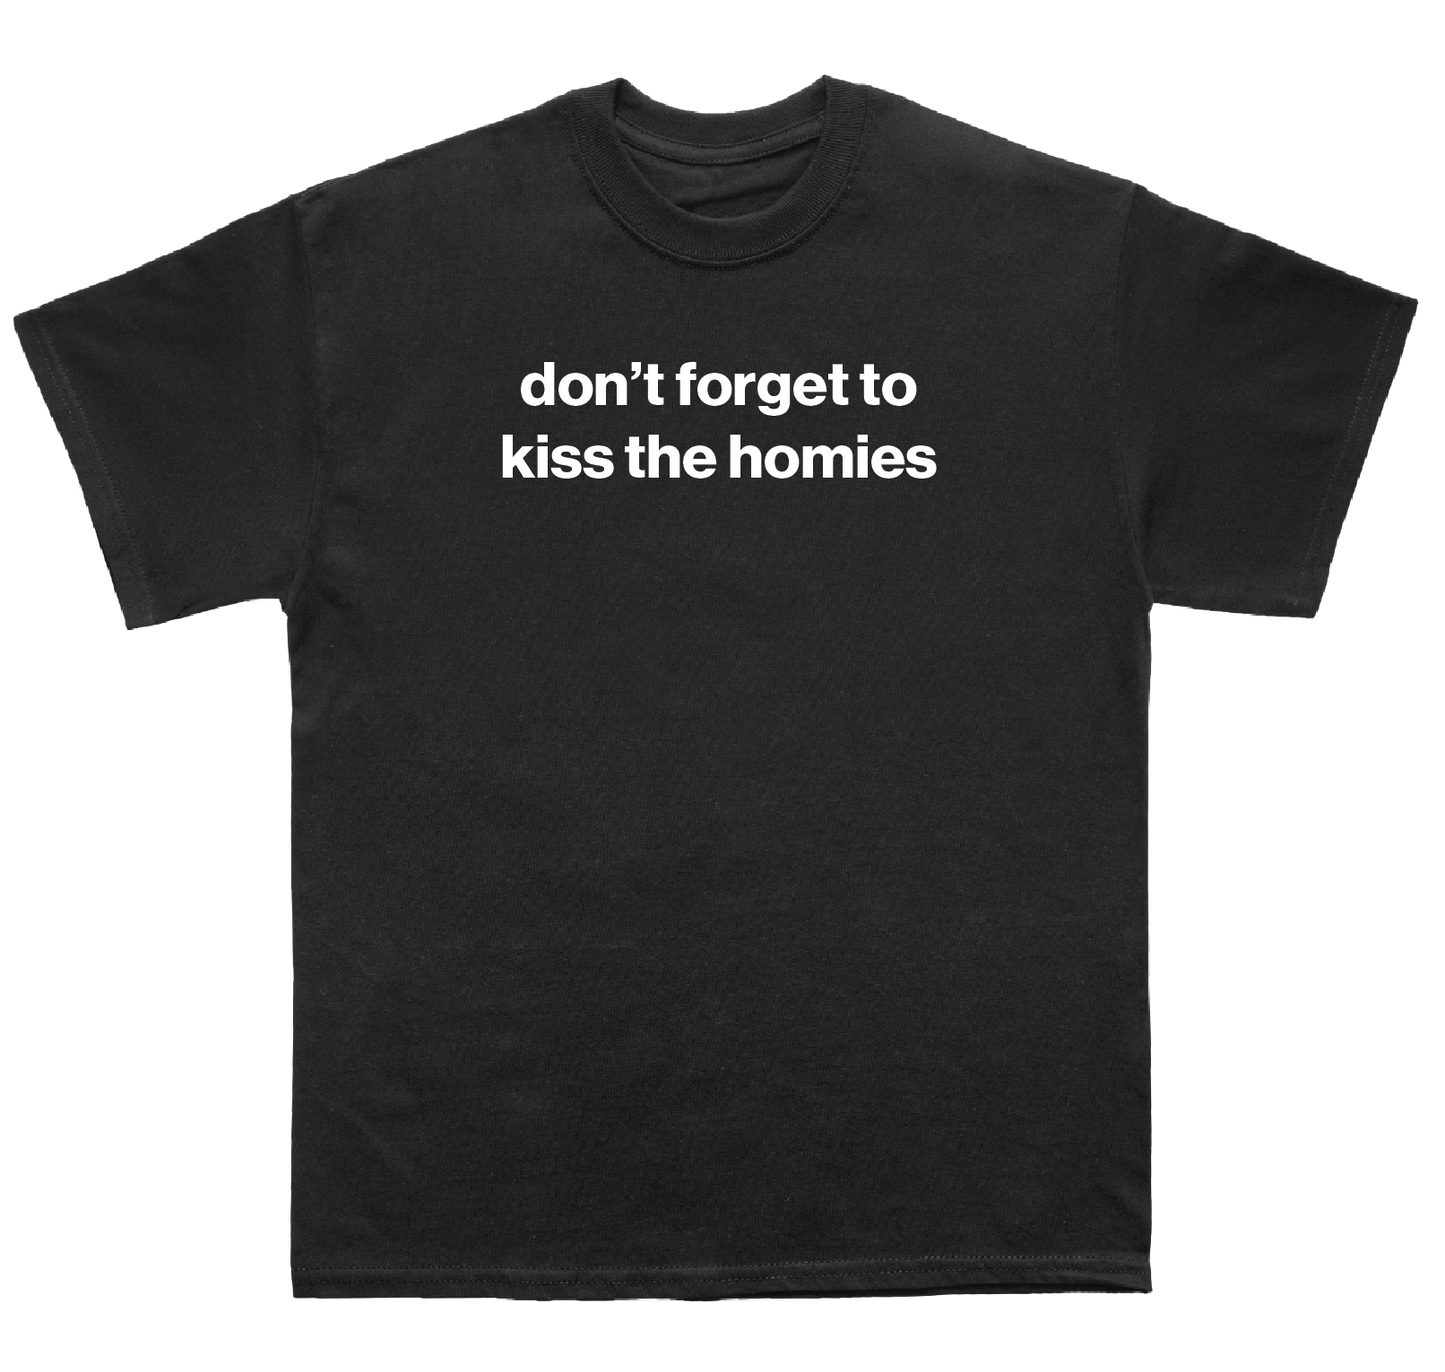 don't forget to kiss the homies shirt